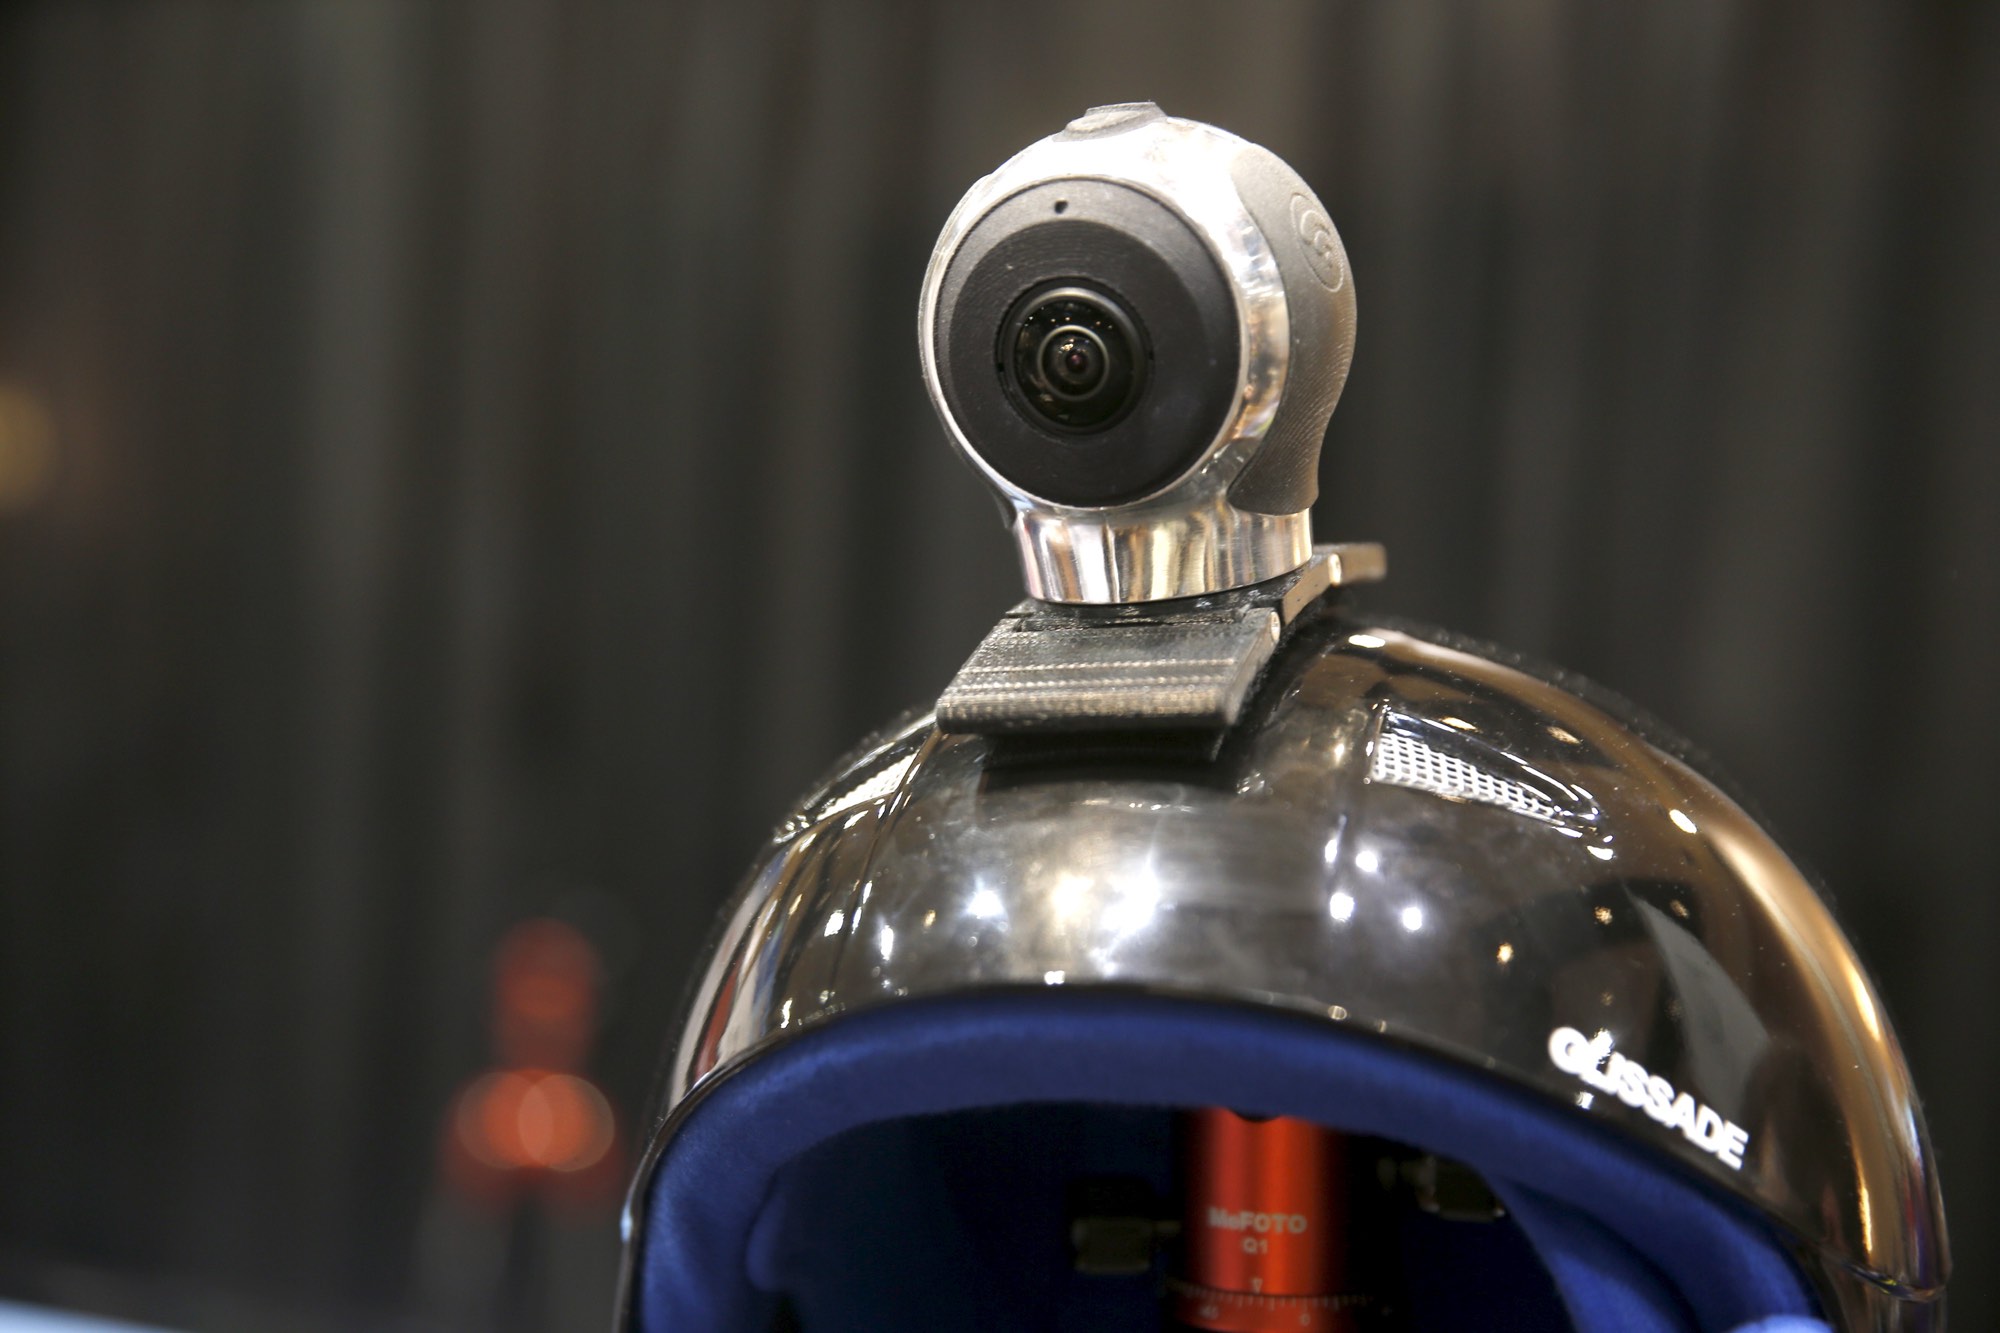 An Allie Go, a 360-degree action cam, by IC Real Tech is shown on a helmet. The $599.00 camera uses two sensors with over 180 degree-coverage each and combines the video in the unit using Qualcomm processors.  REUTERS